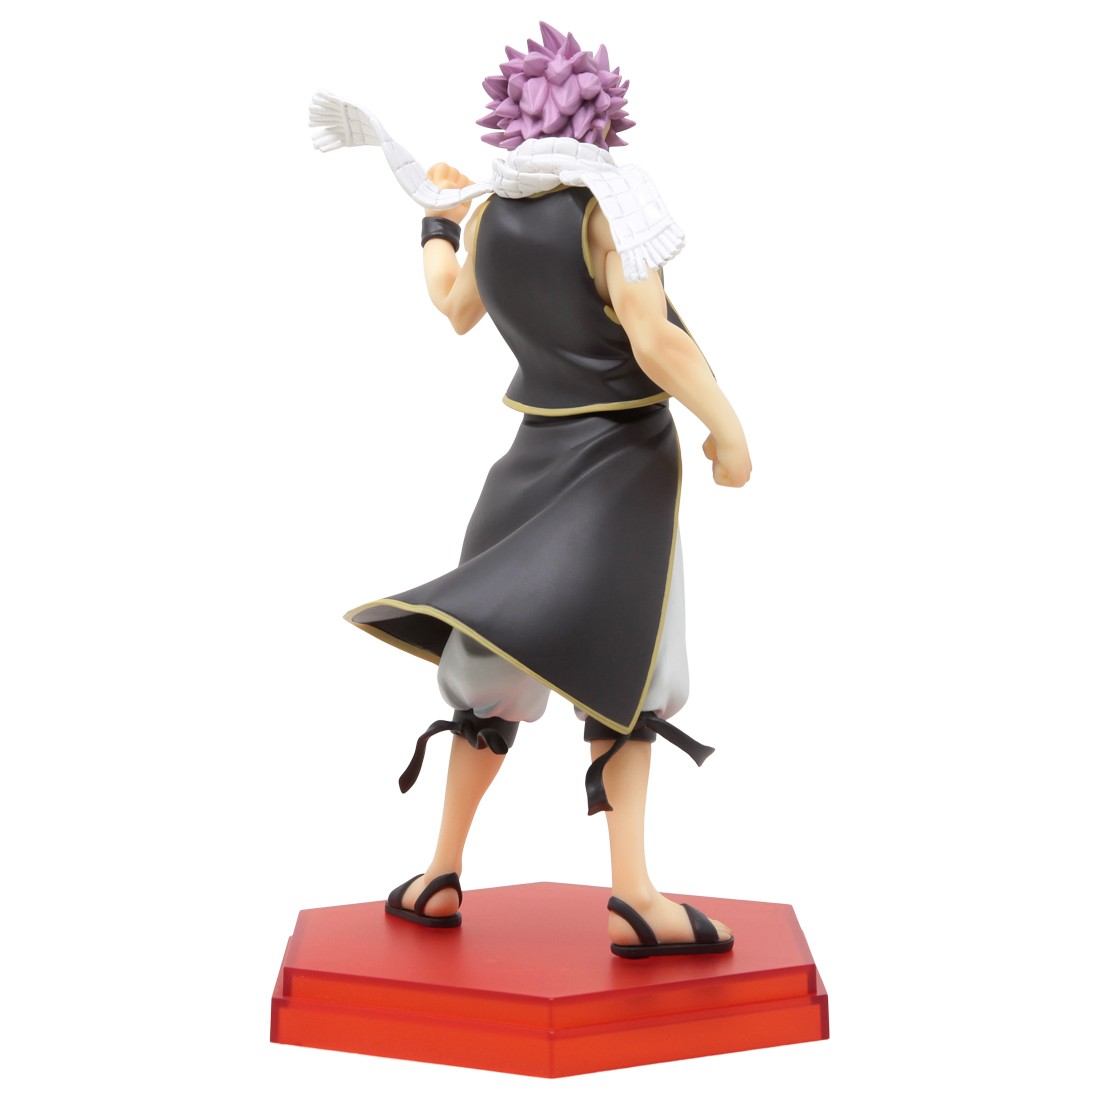 Luxetoys Natsu Dragneel Figure Fairy Tail Anime Character Figures 22 cm  Model Statue for Gift and Collecting : Amazon.de: Toys